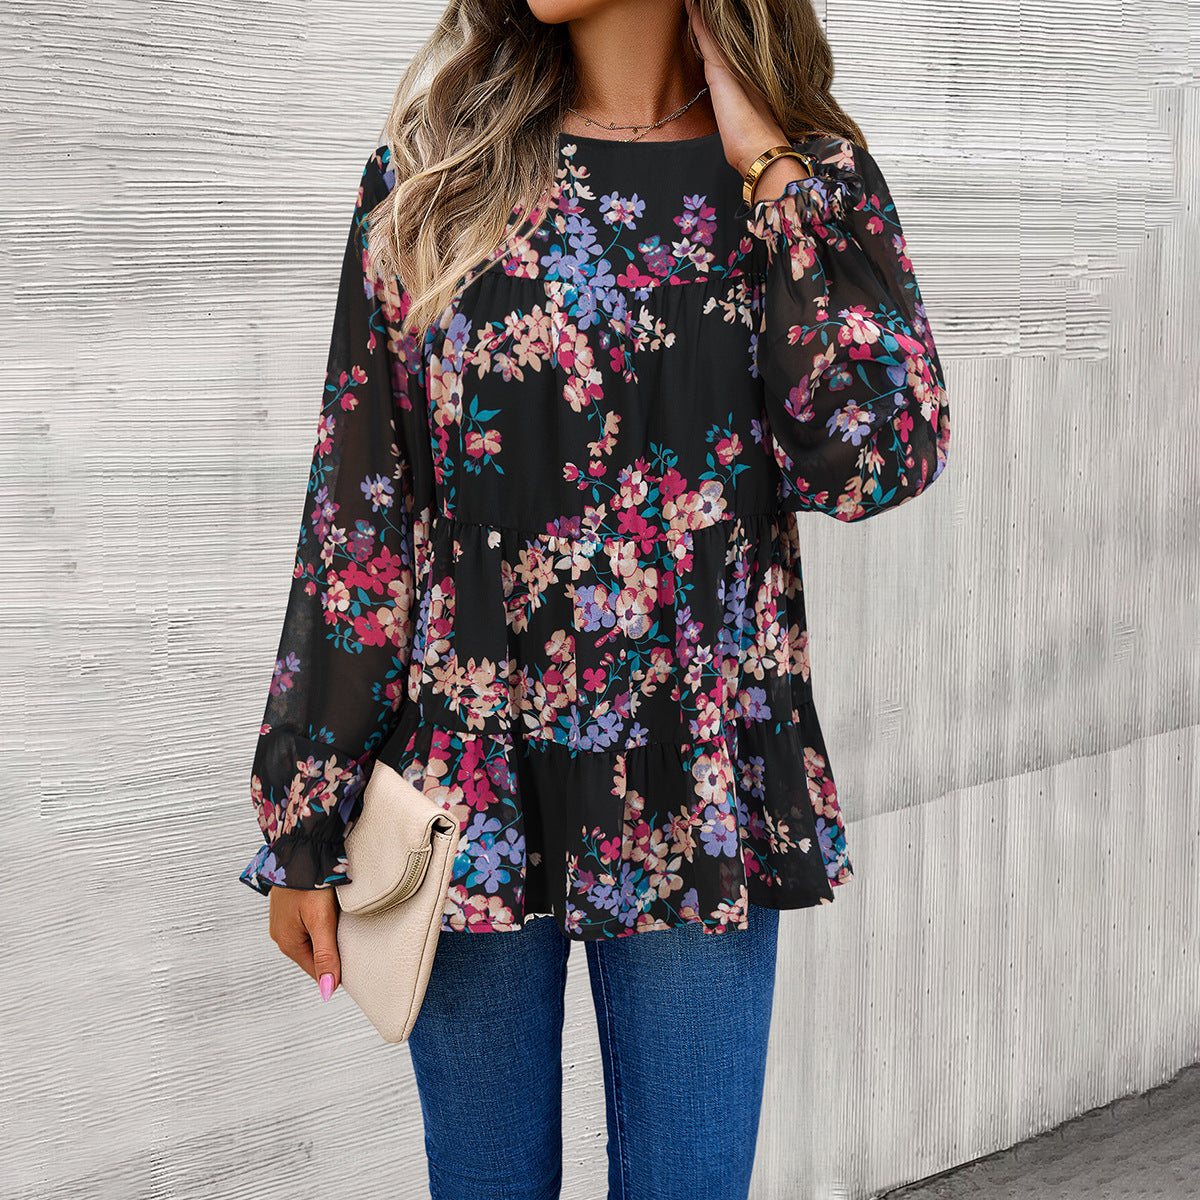 Women Clothing Autumn Winter Casual Printing Long Sleeve round Neck Top